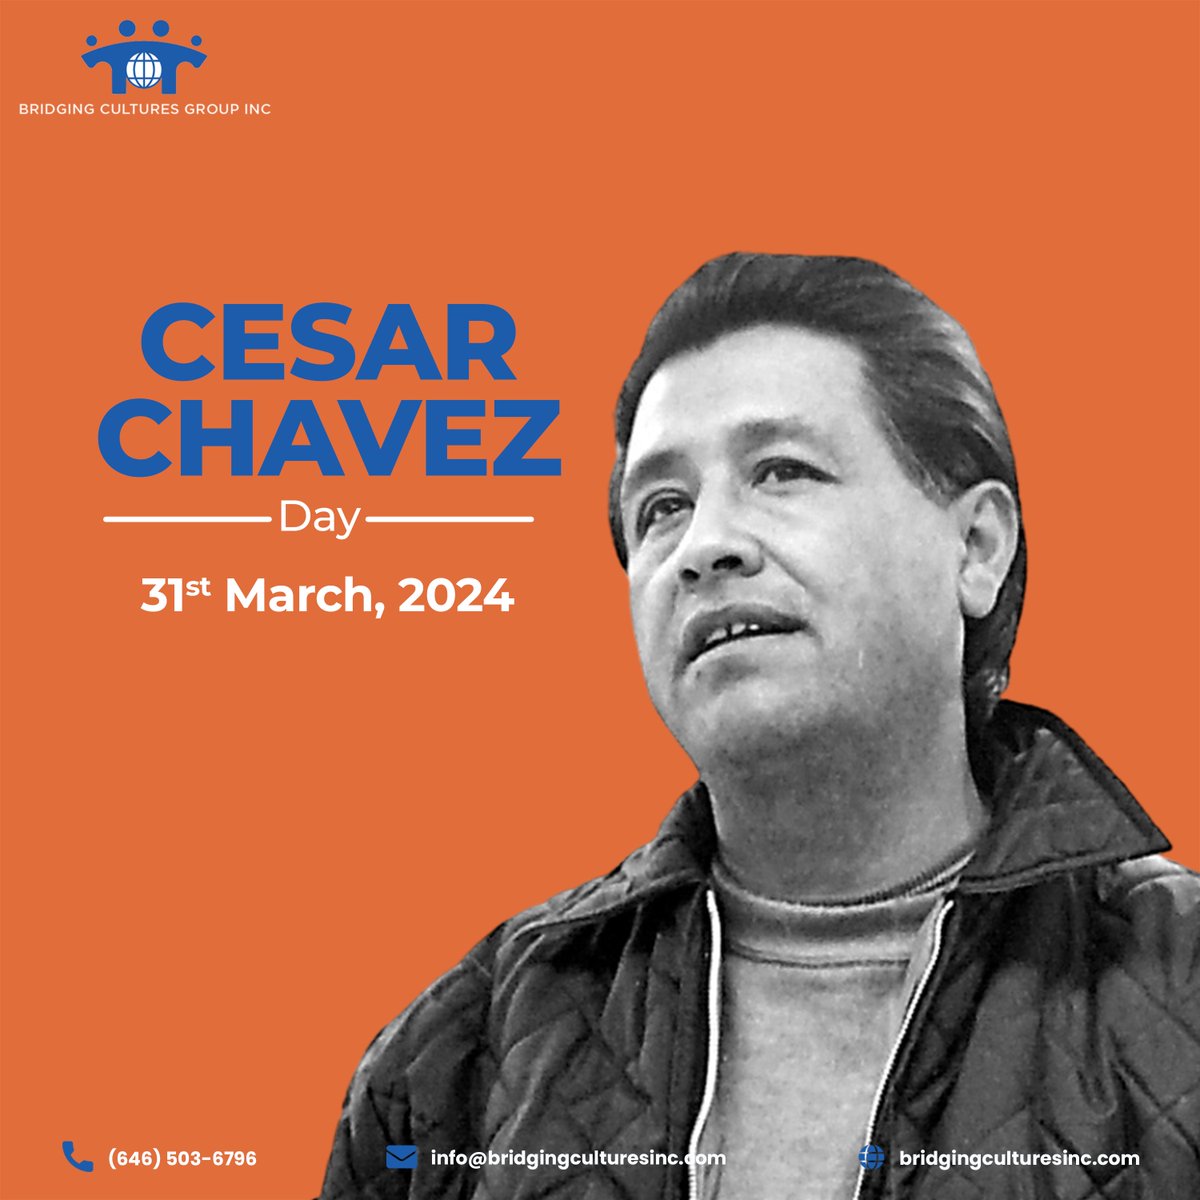 Today, we honor #CesarChavezDay, celebrating the enduring spirit and impactful legacy of a man who fought tirelessly for workers' rights and equality. Let's be inspired by his commitment to change and continue to work towards a fair and just society.

#BCG #DEI #JusticeForWorkers